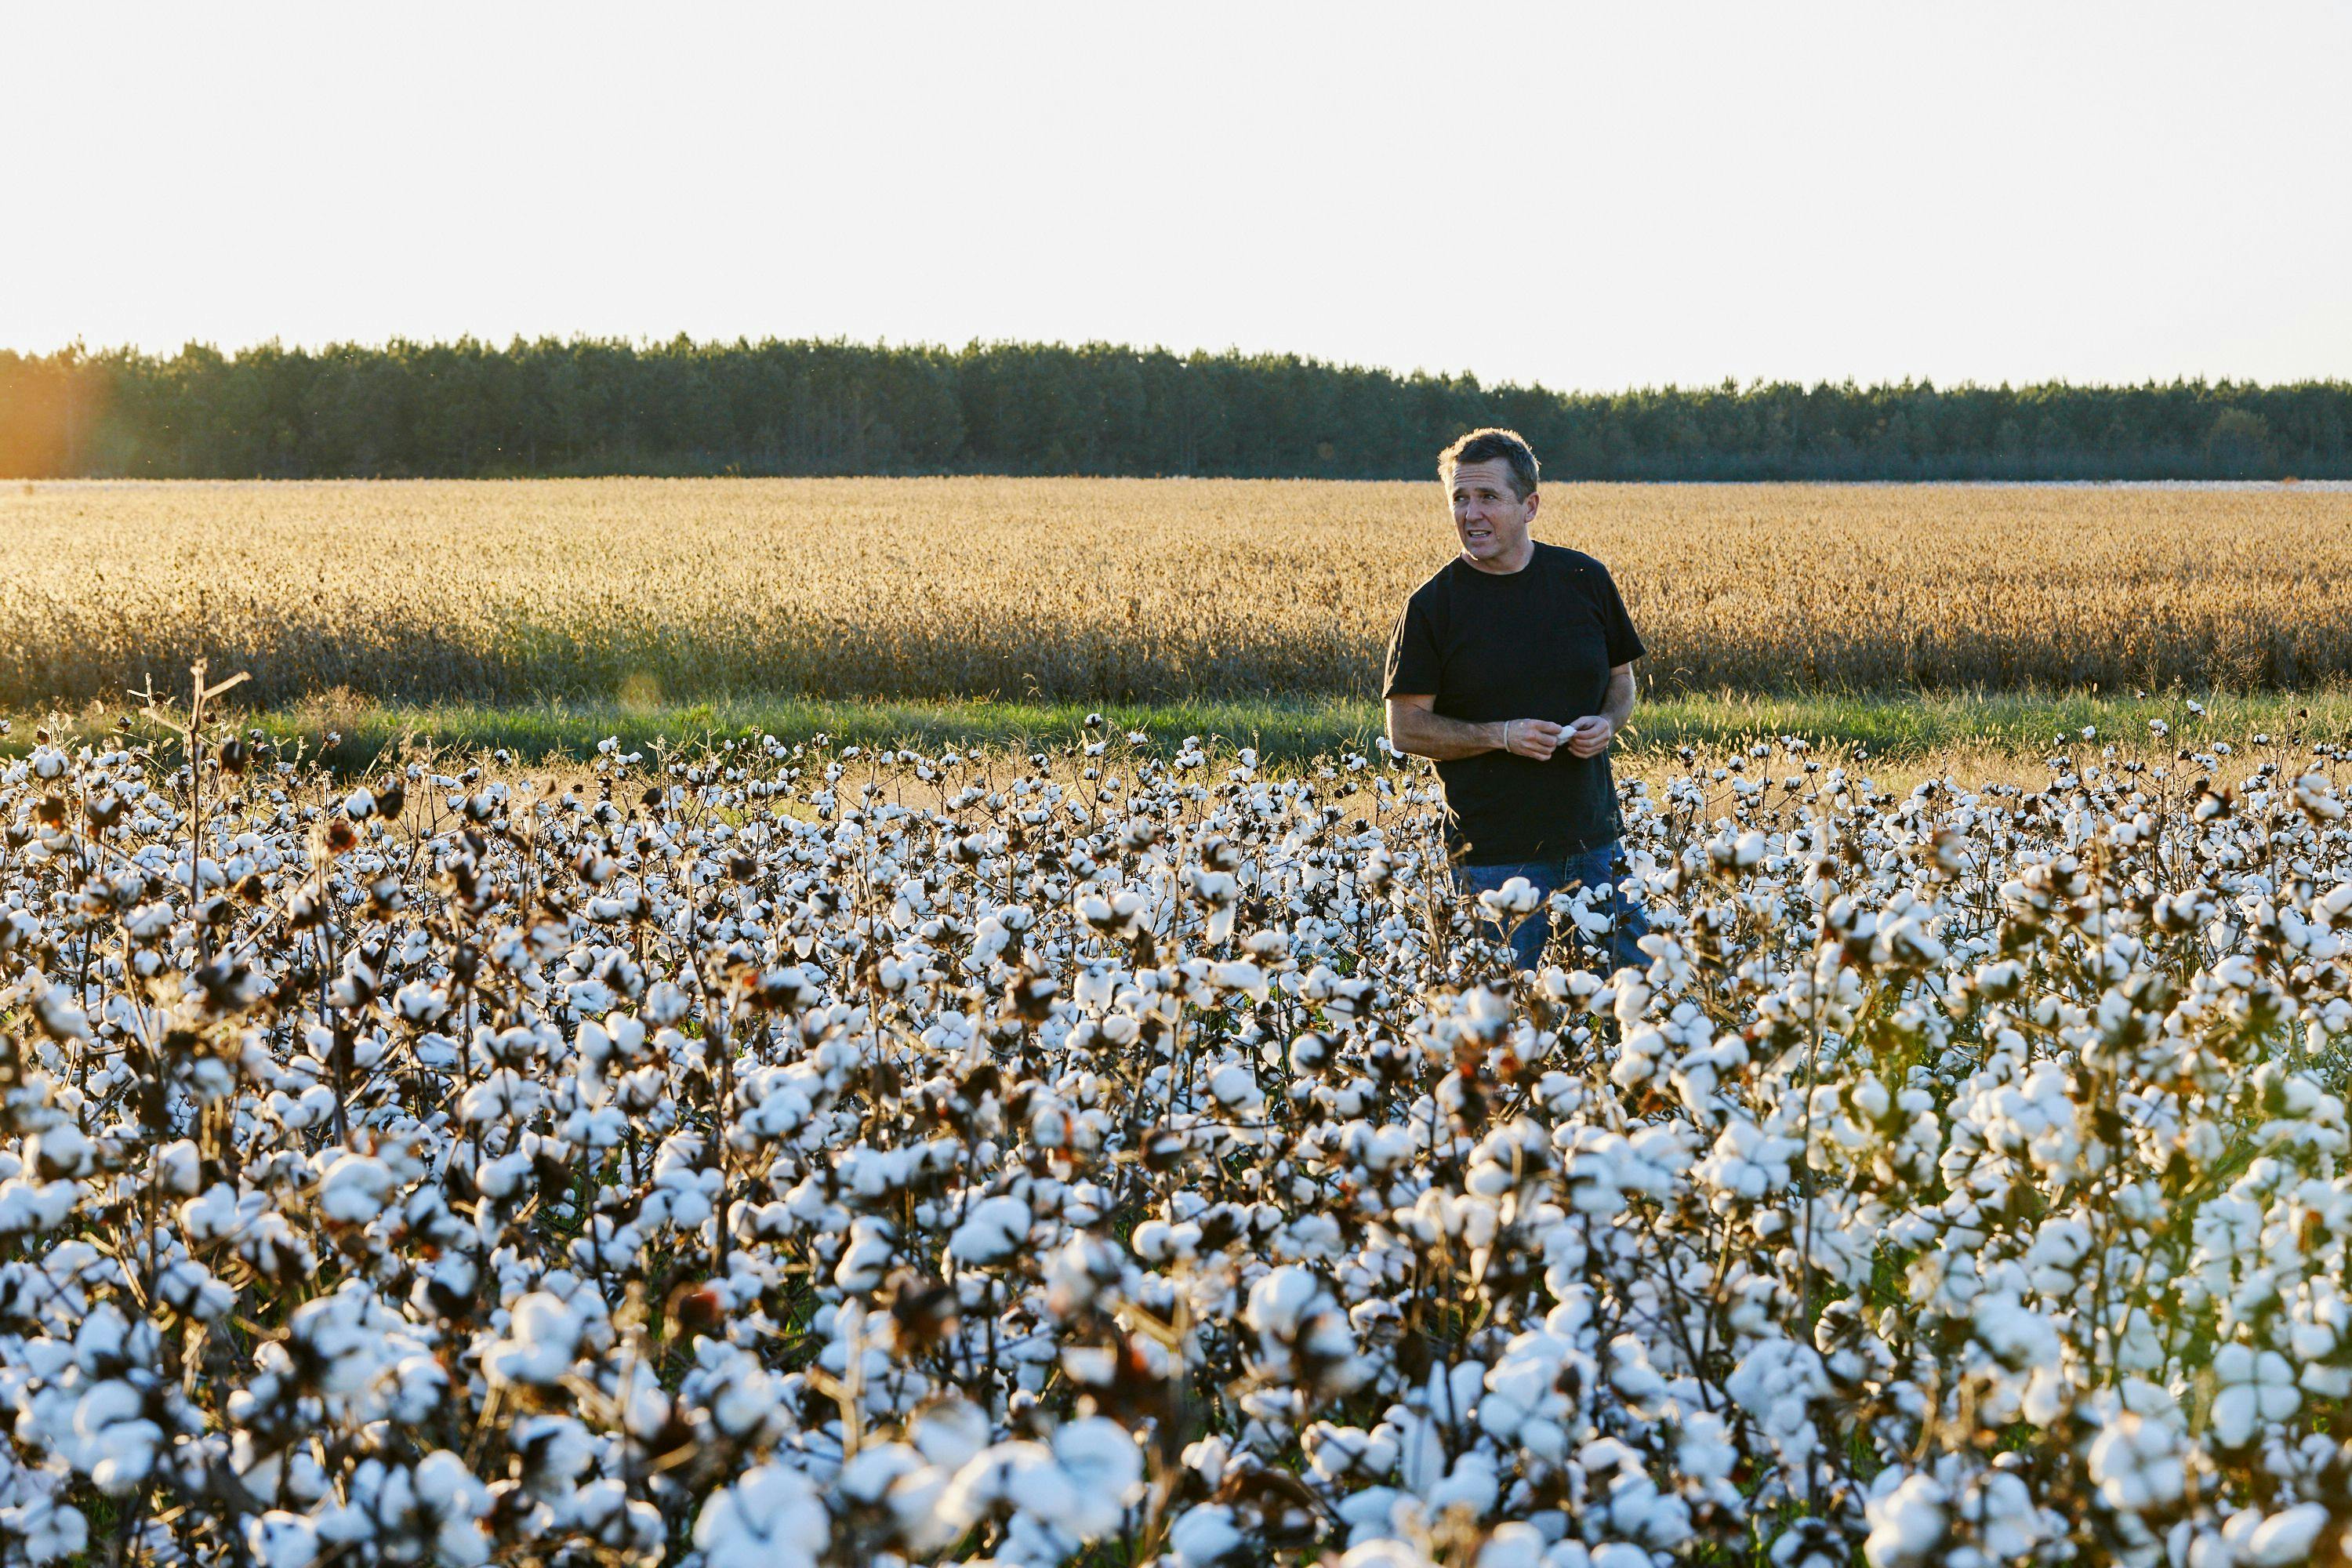 American Giant founder and CEO Bayard Winthrop stands in a cotton field.